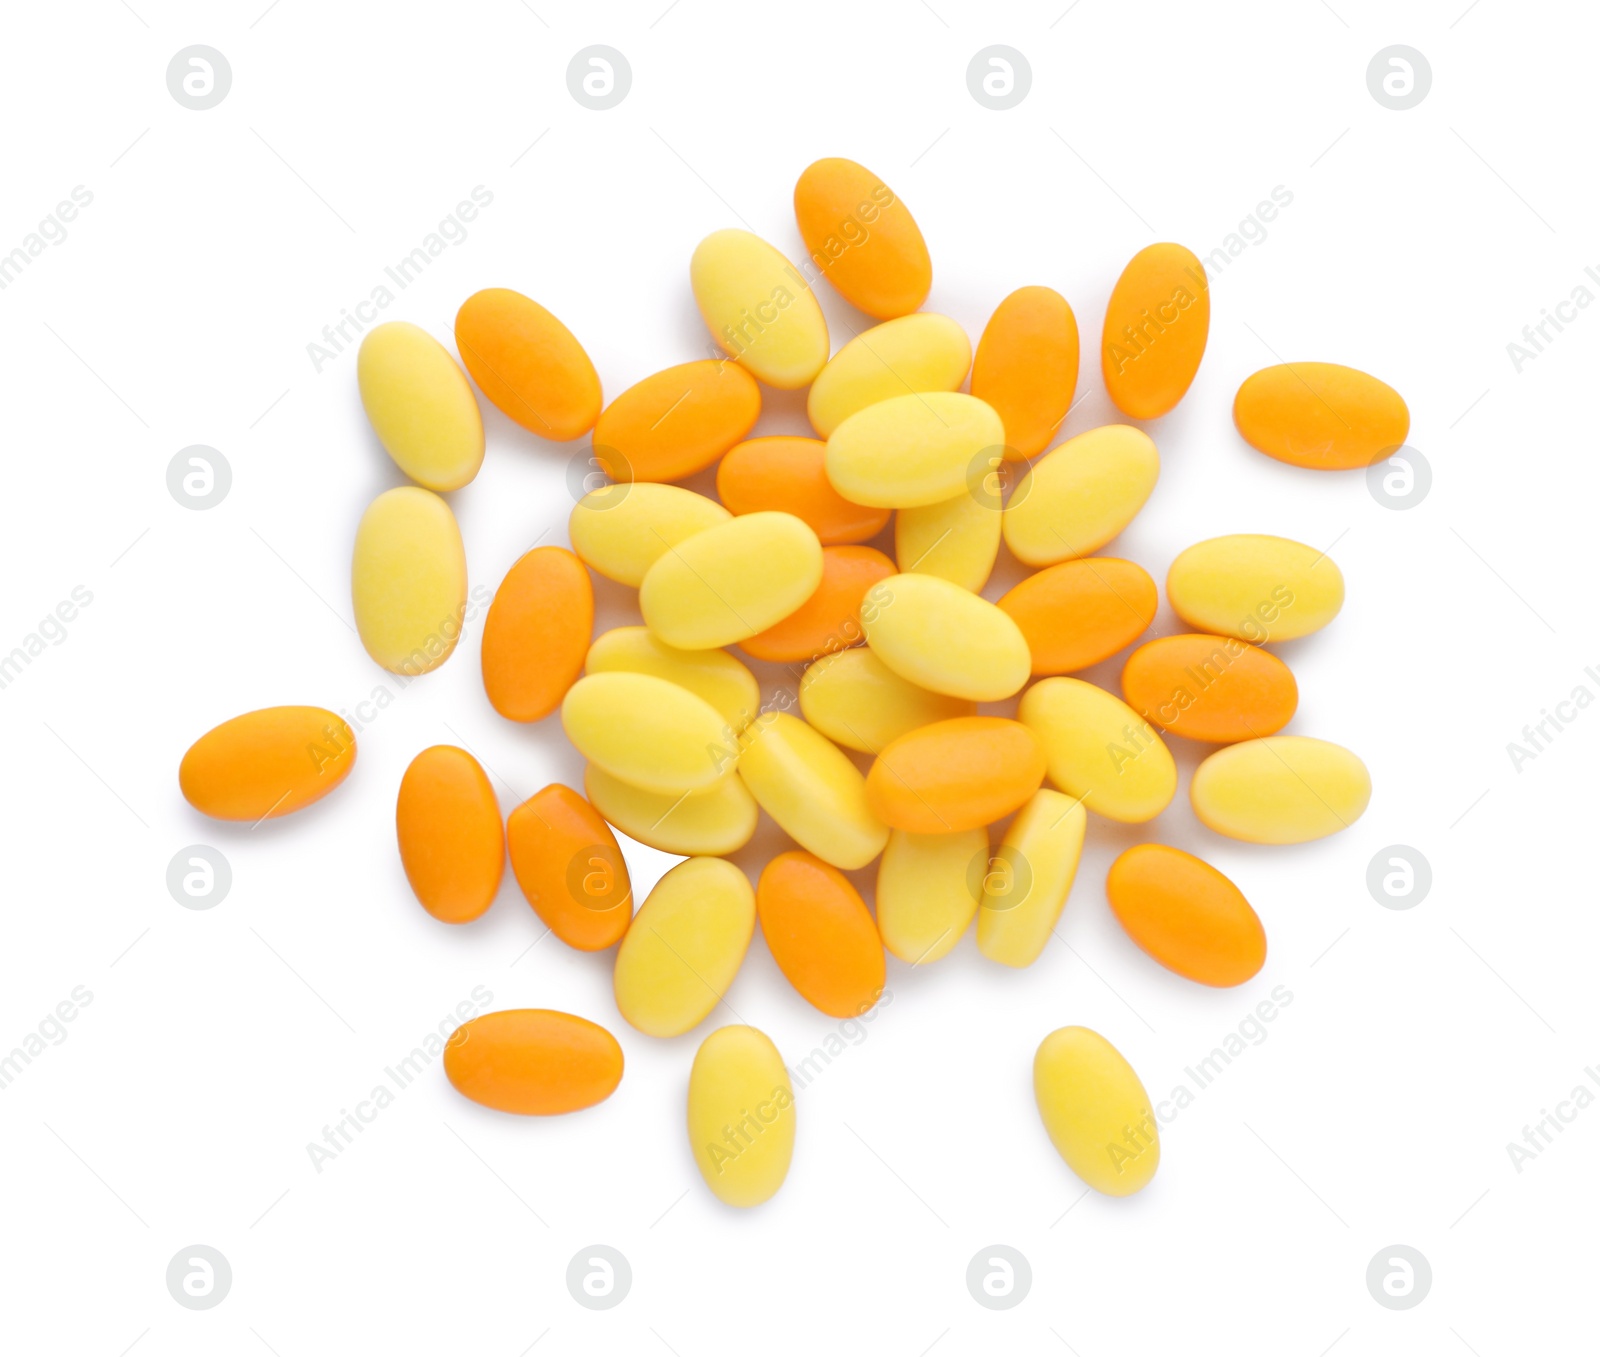 Photo of Tasty yellow and orange dragee candies on white background, top view